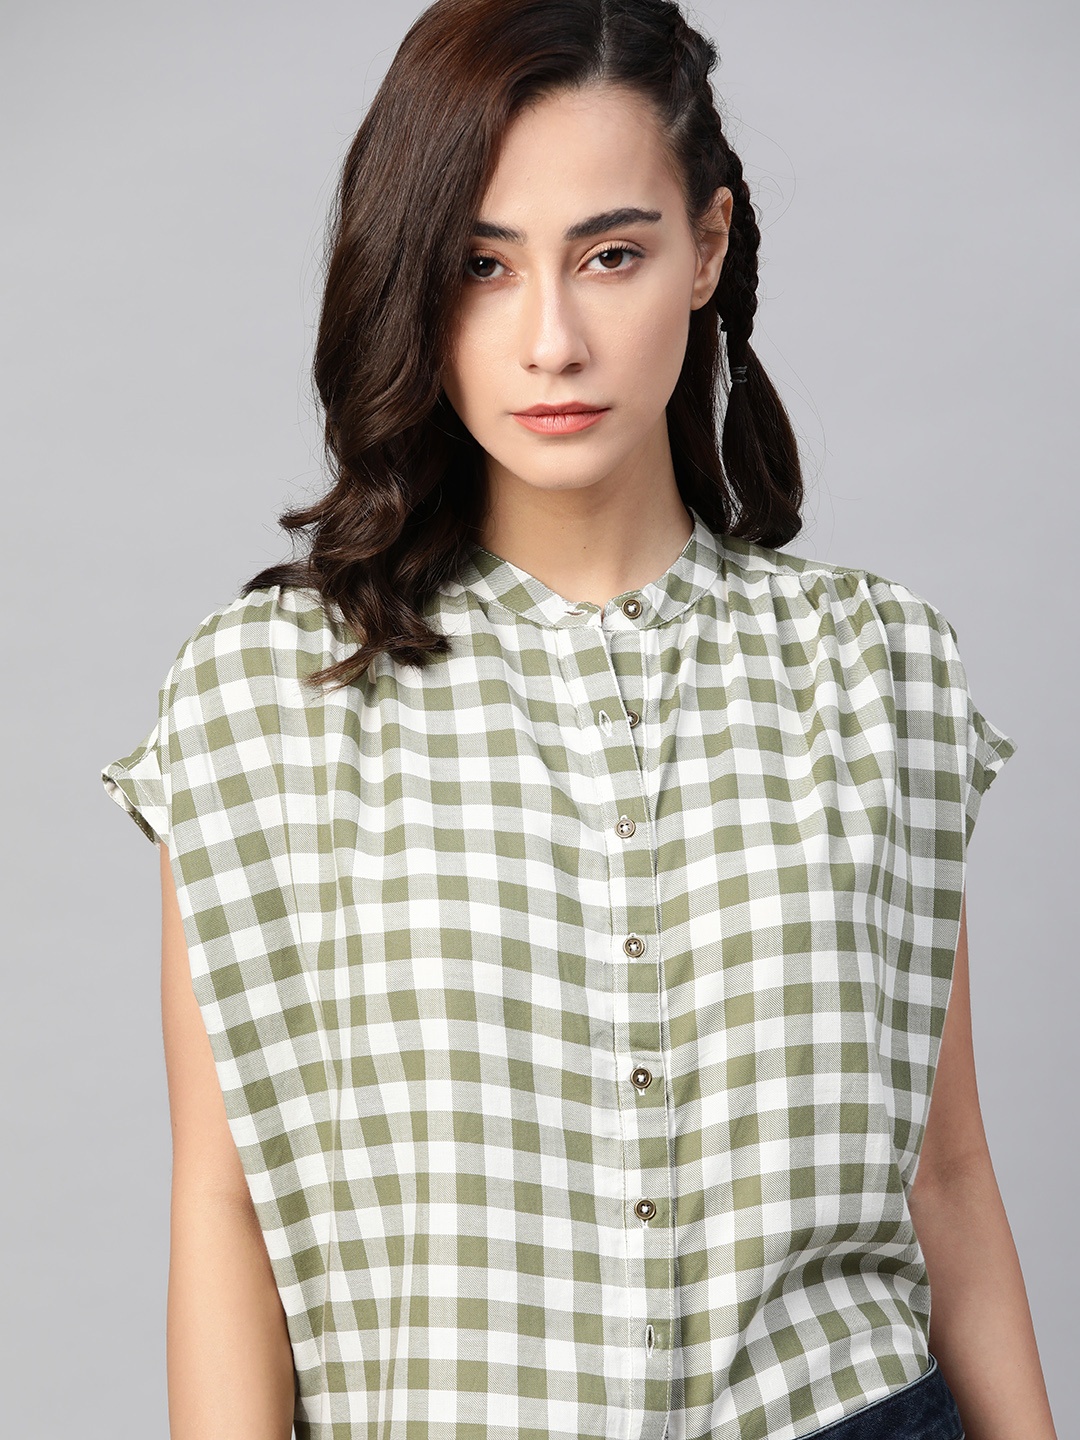 

The Roadster Lifestyle Co Women White & Olive Green Boxy Gingham Checks Checked Sustainable Casual Shirt